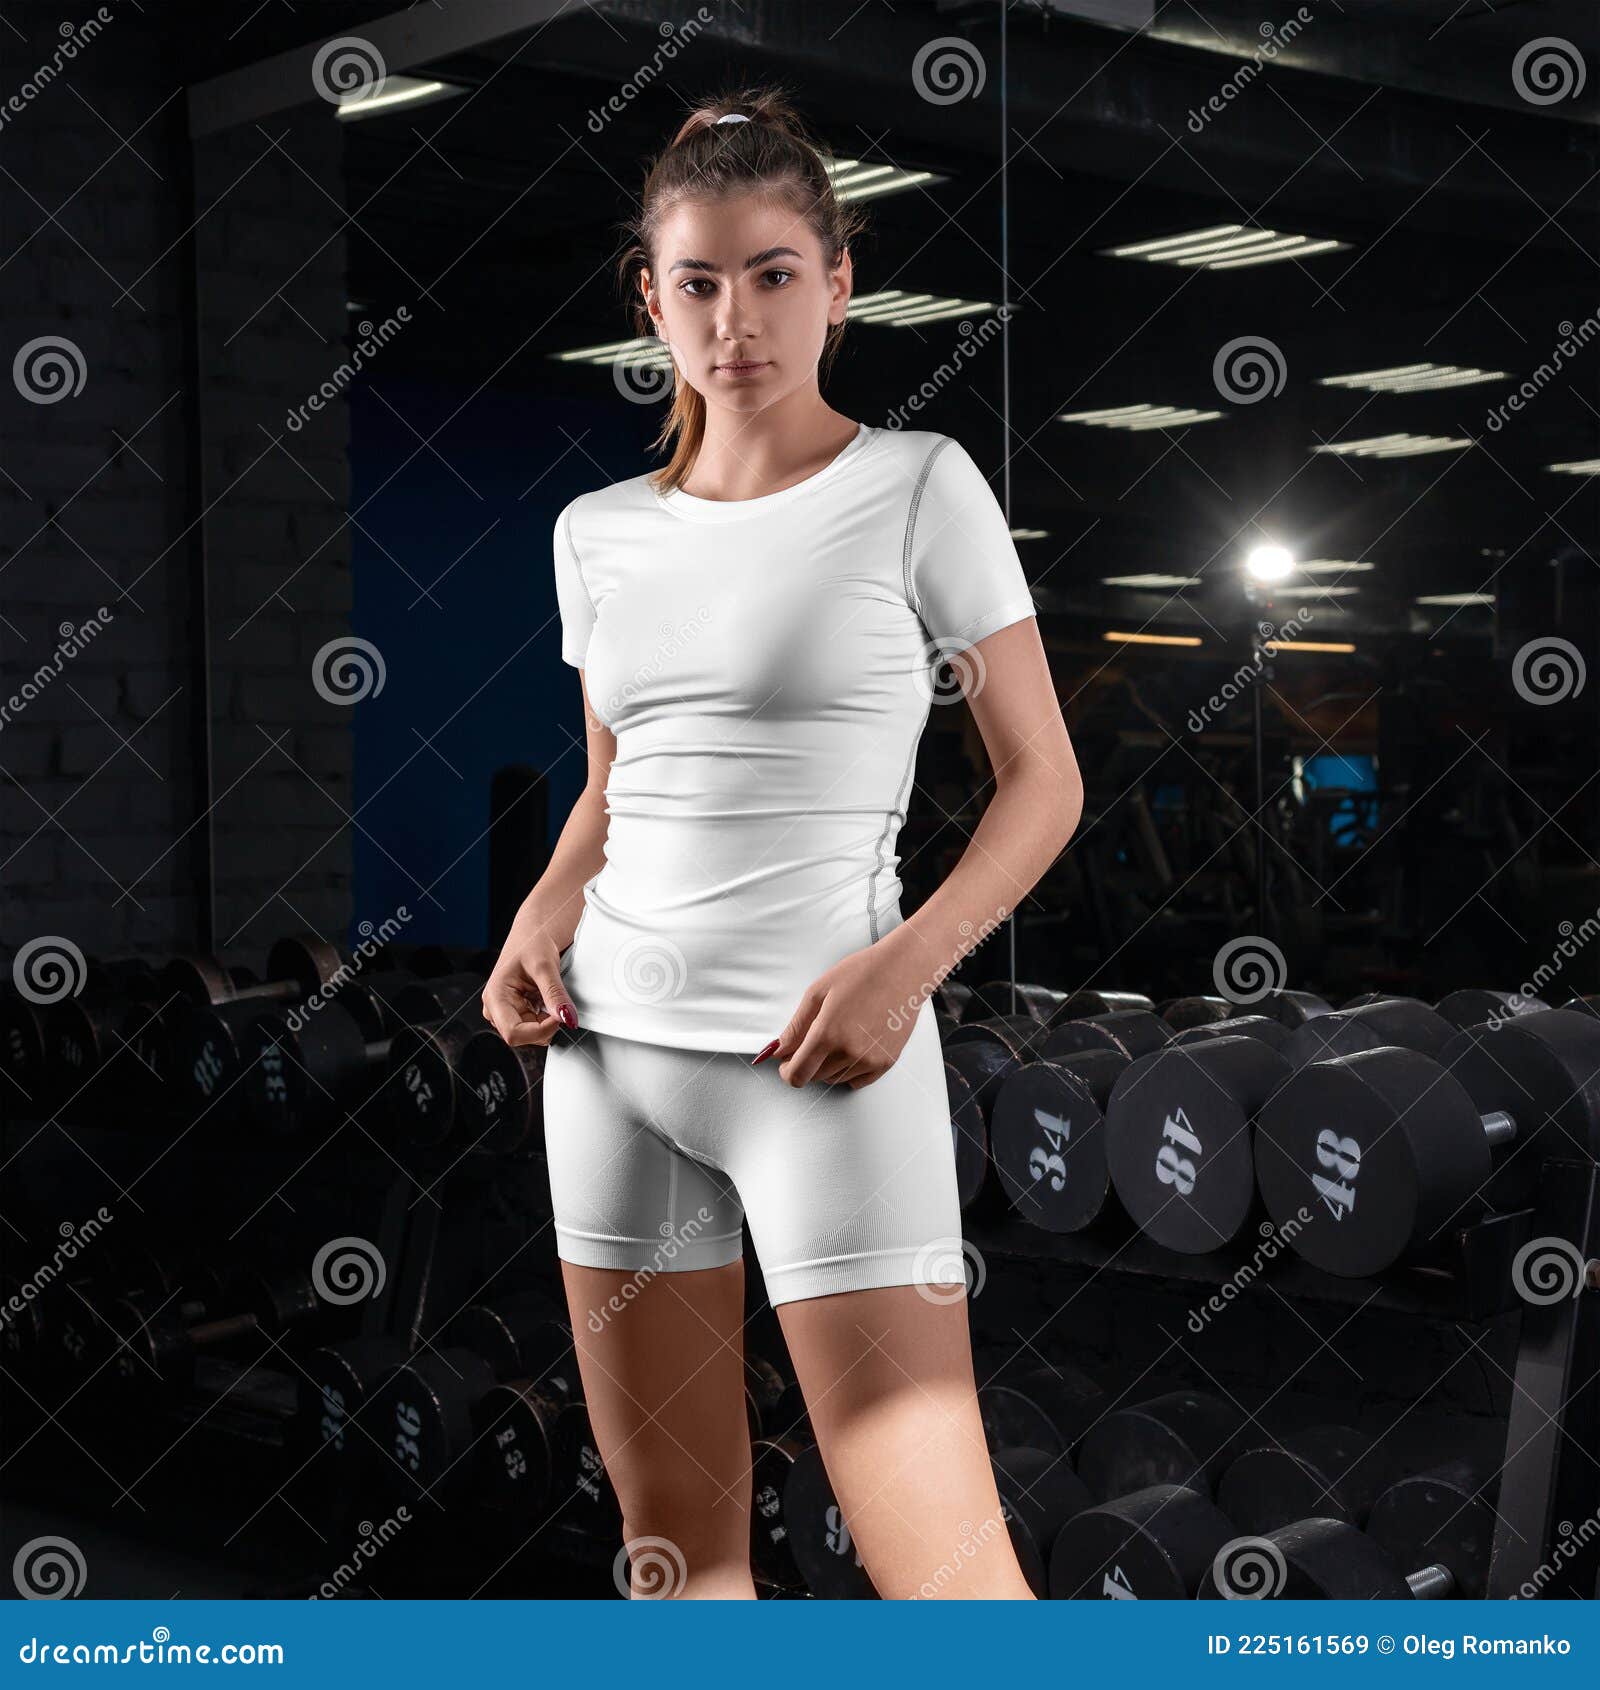 https://thumbs.dreamstime.com/z/mockup-white-tracksuit-girl-gym-empty-compression-underwear-design-print-template-t-shirt-bicycles-yoga-suit-225161569.jpg